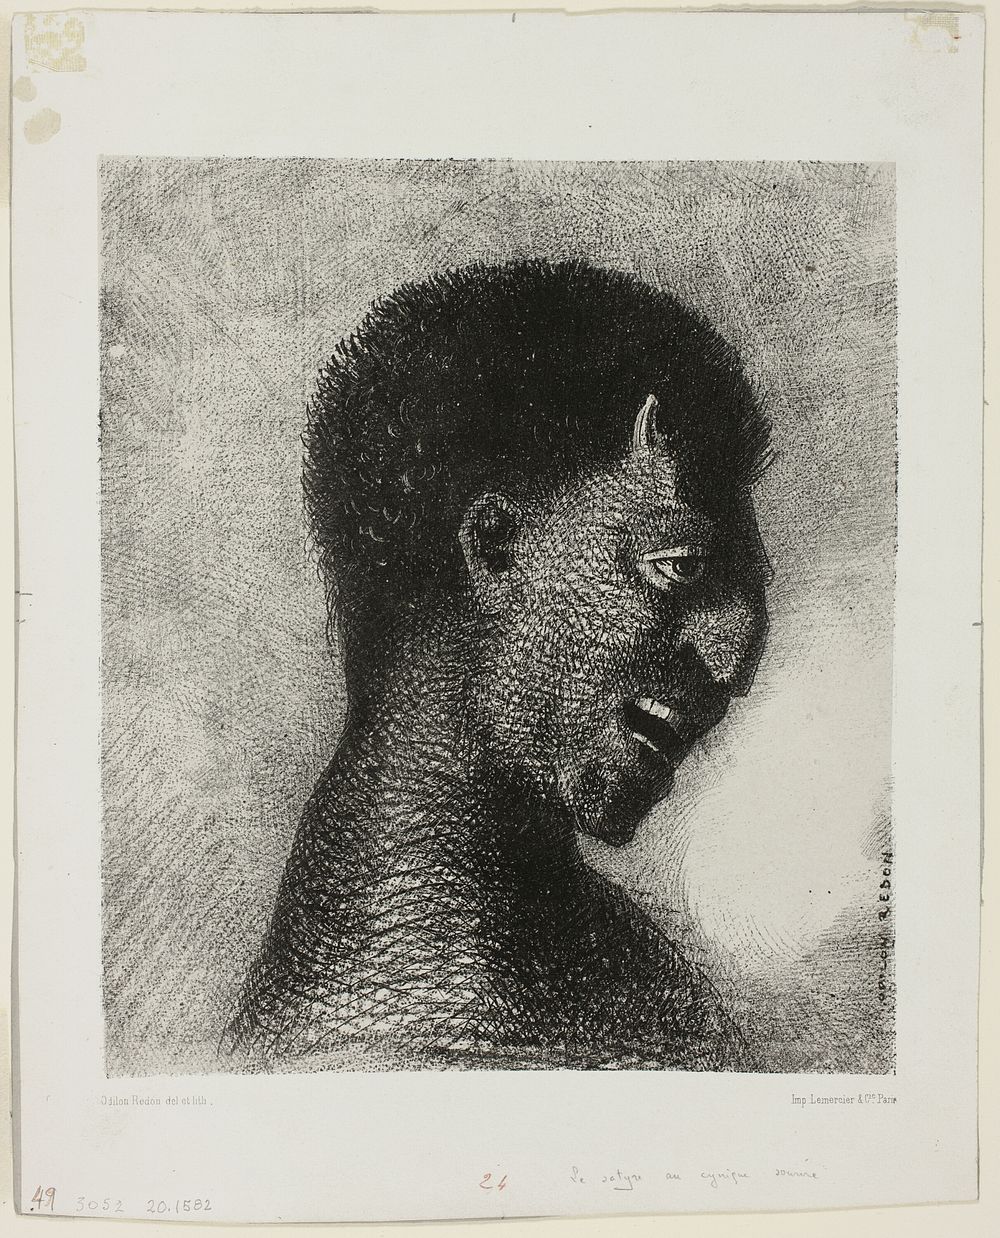 The Satyr with the Cynical Smile, plate 5 of 8 from "Les Origines" by Odilon Redon